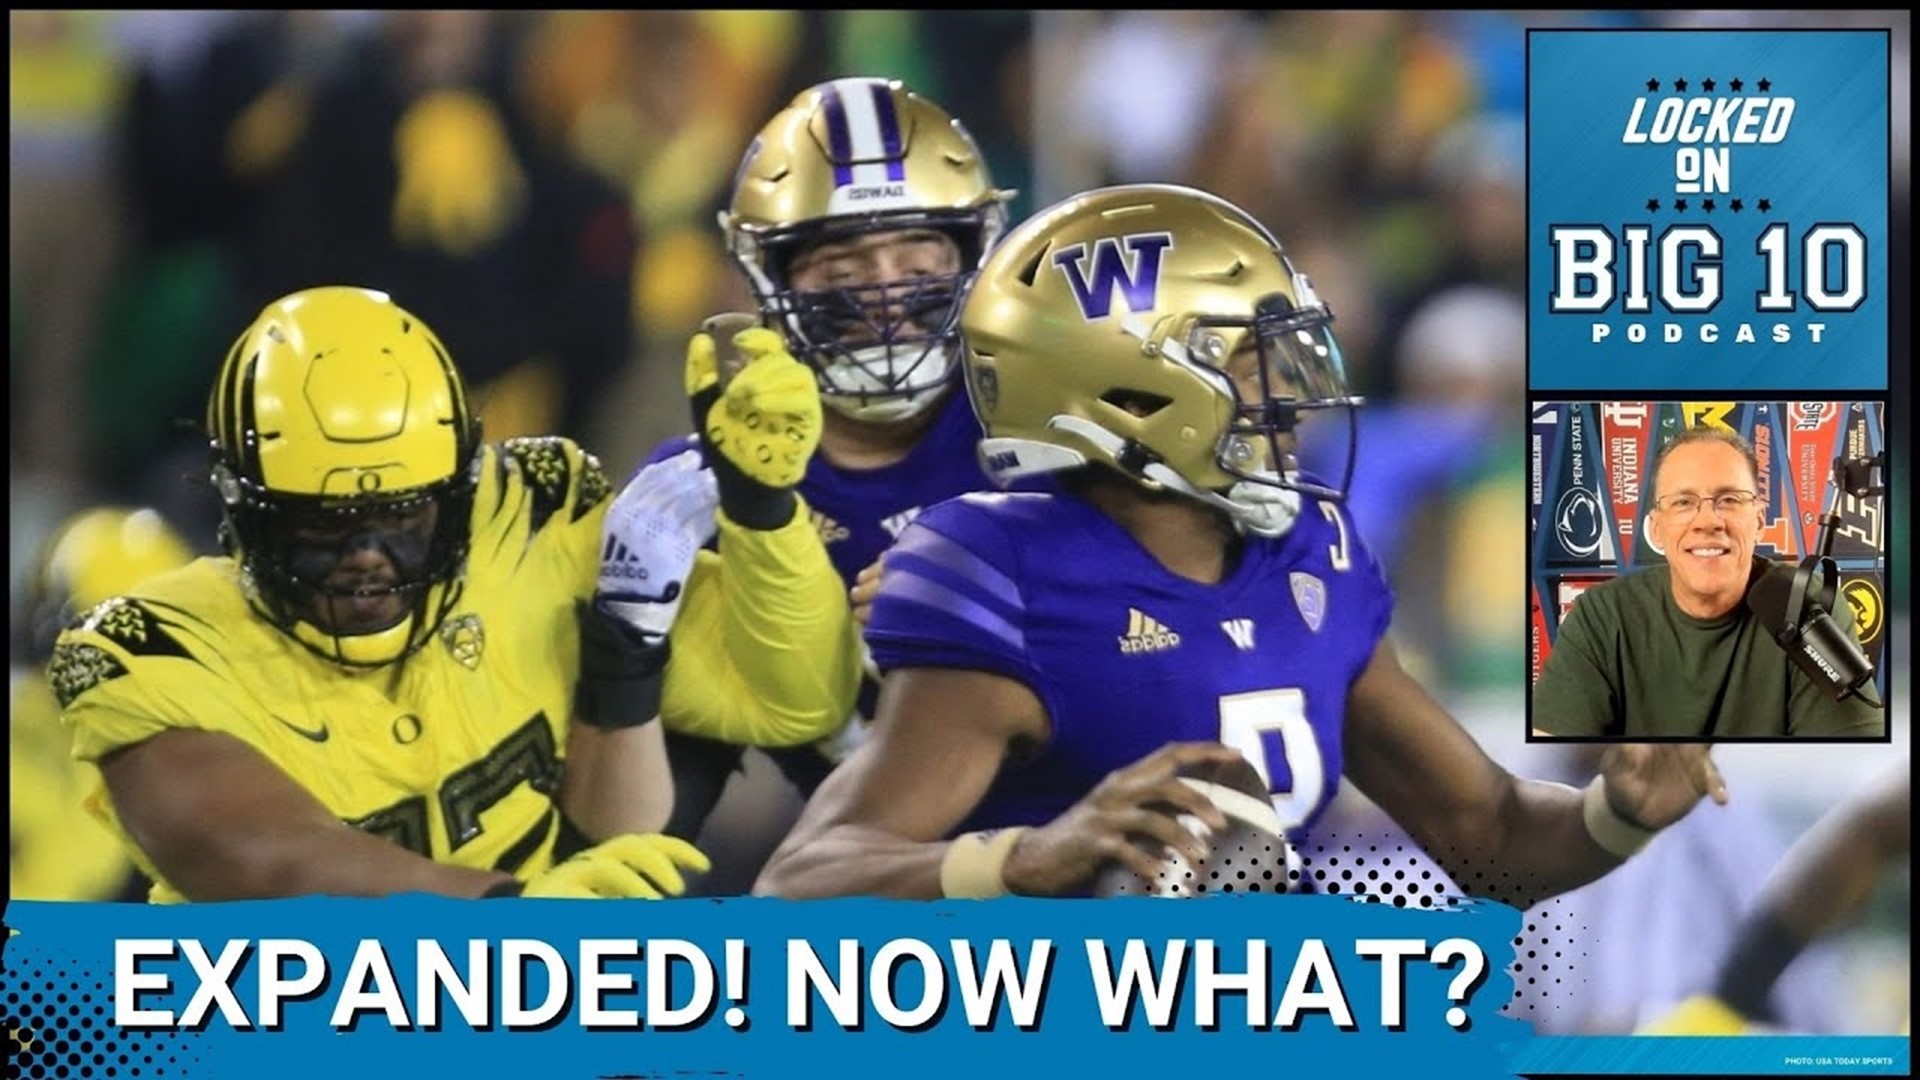 A year after the Big 10 conference expanded with the USC Trojans and UCLA Bruins, they've done it again.  Now the Washington Huskies and Oregon Ducks will join